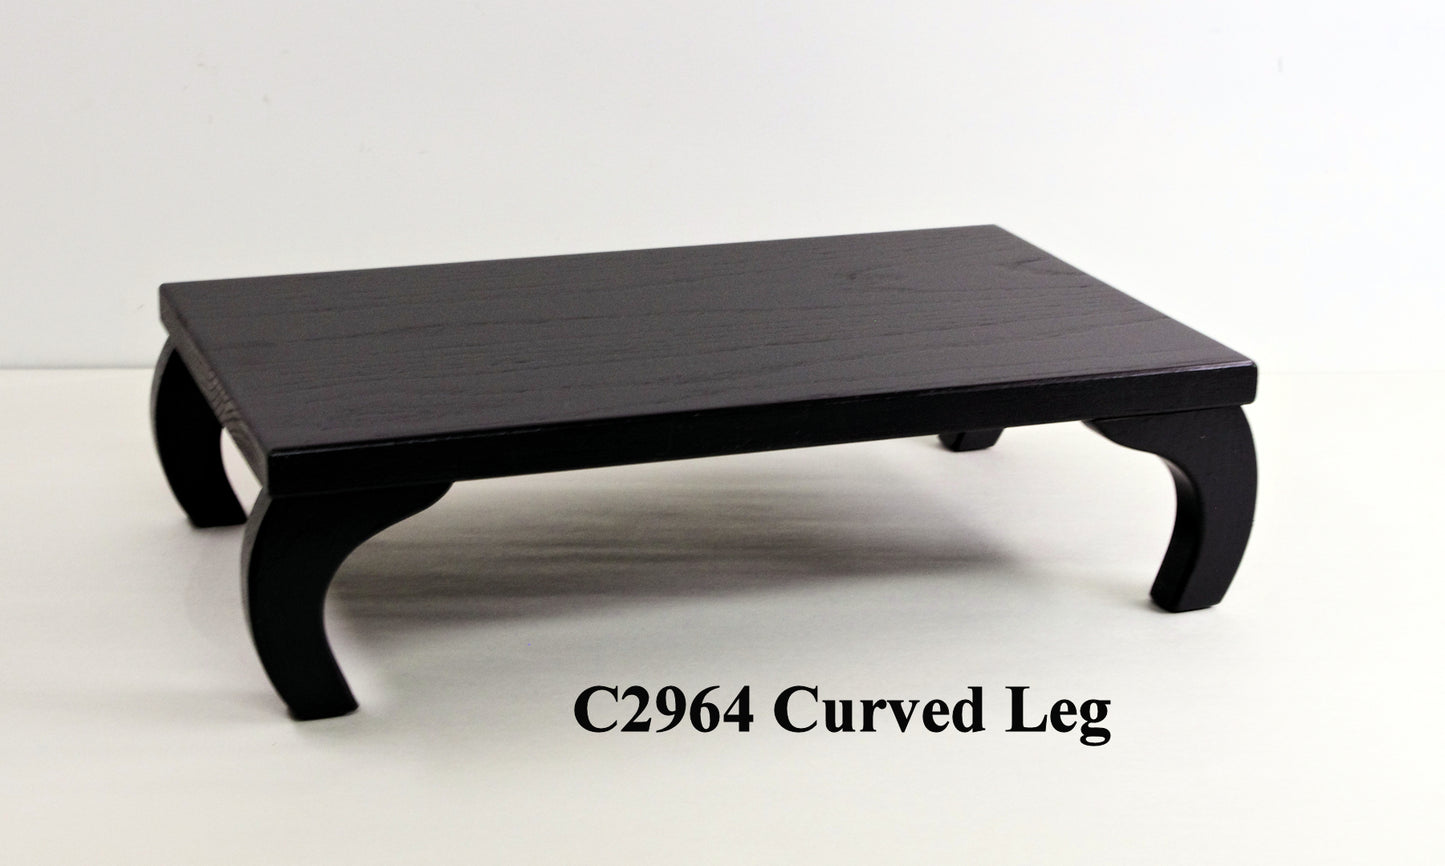 Bonsai Stand Curved Leg C2964 Made to Order 16" Length